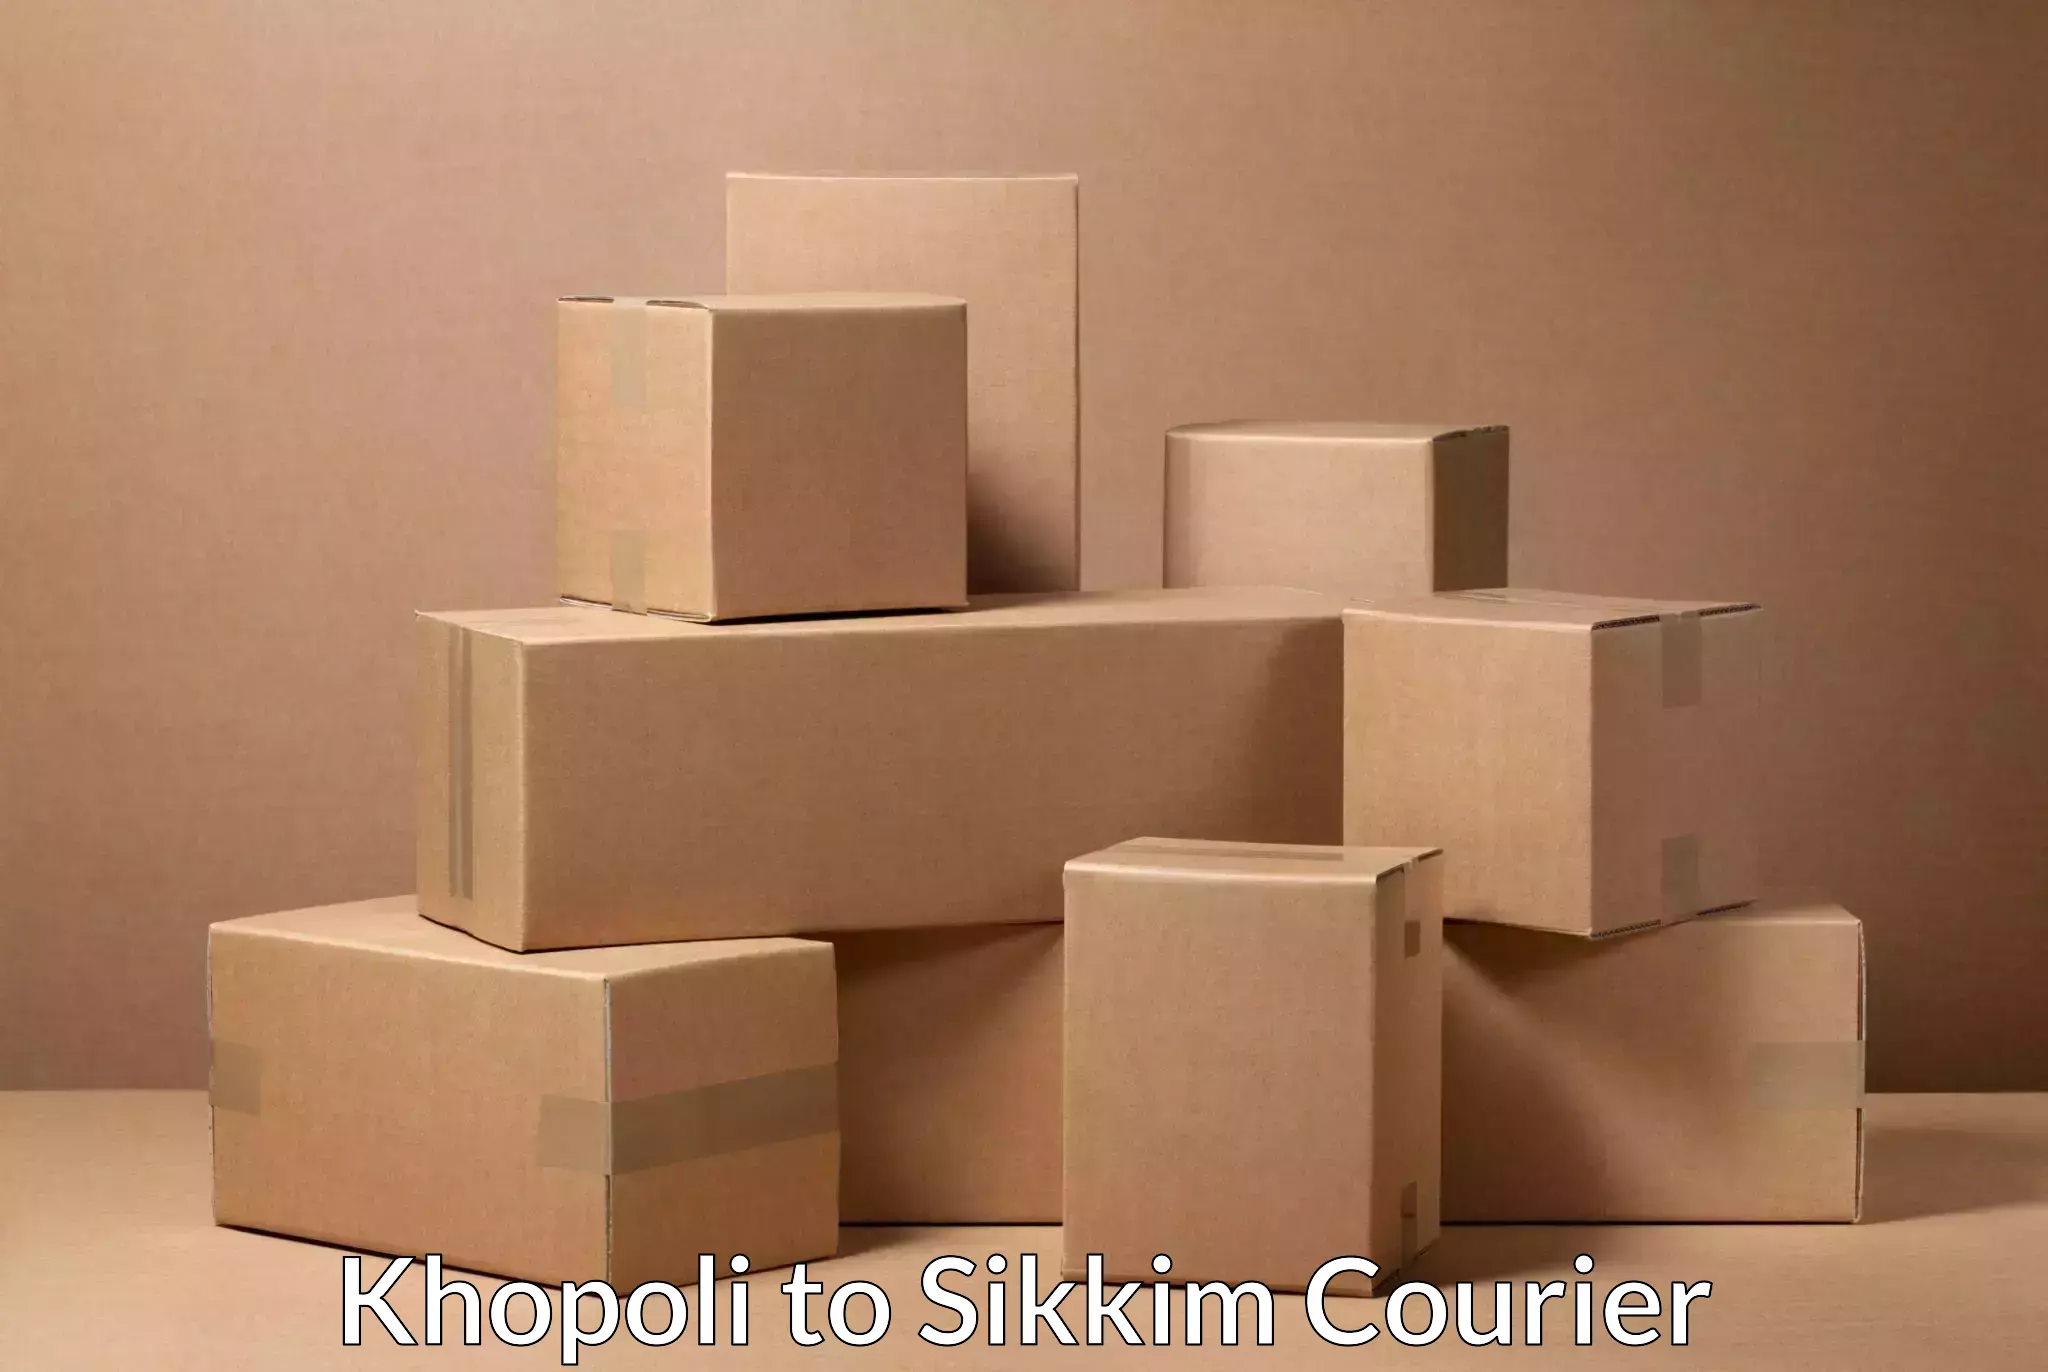 State-of-the-art courier technology Khopoli to Singtam